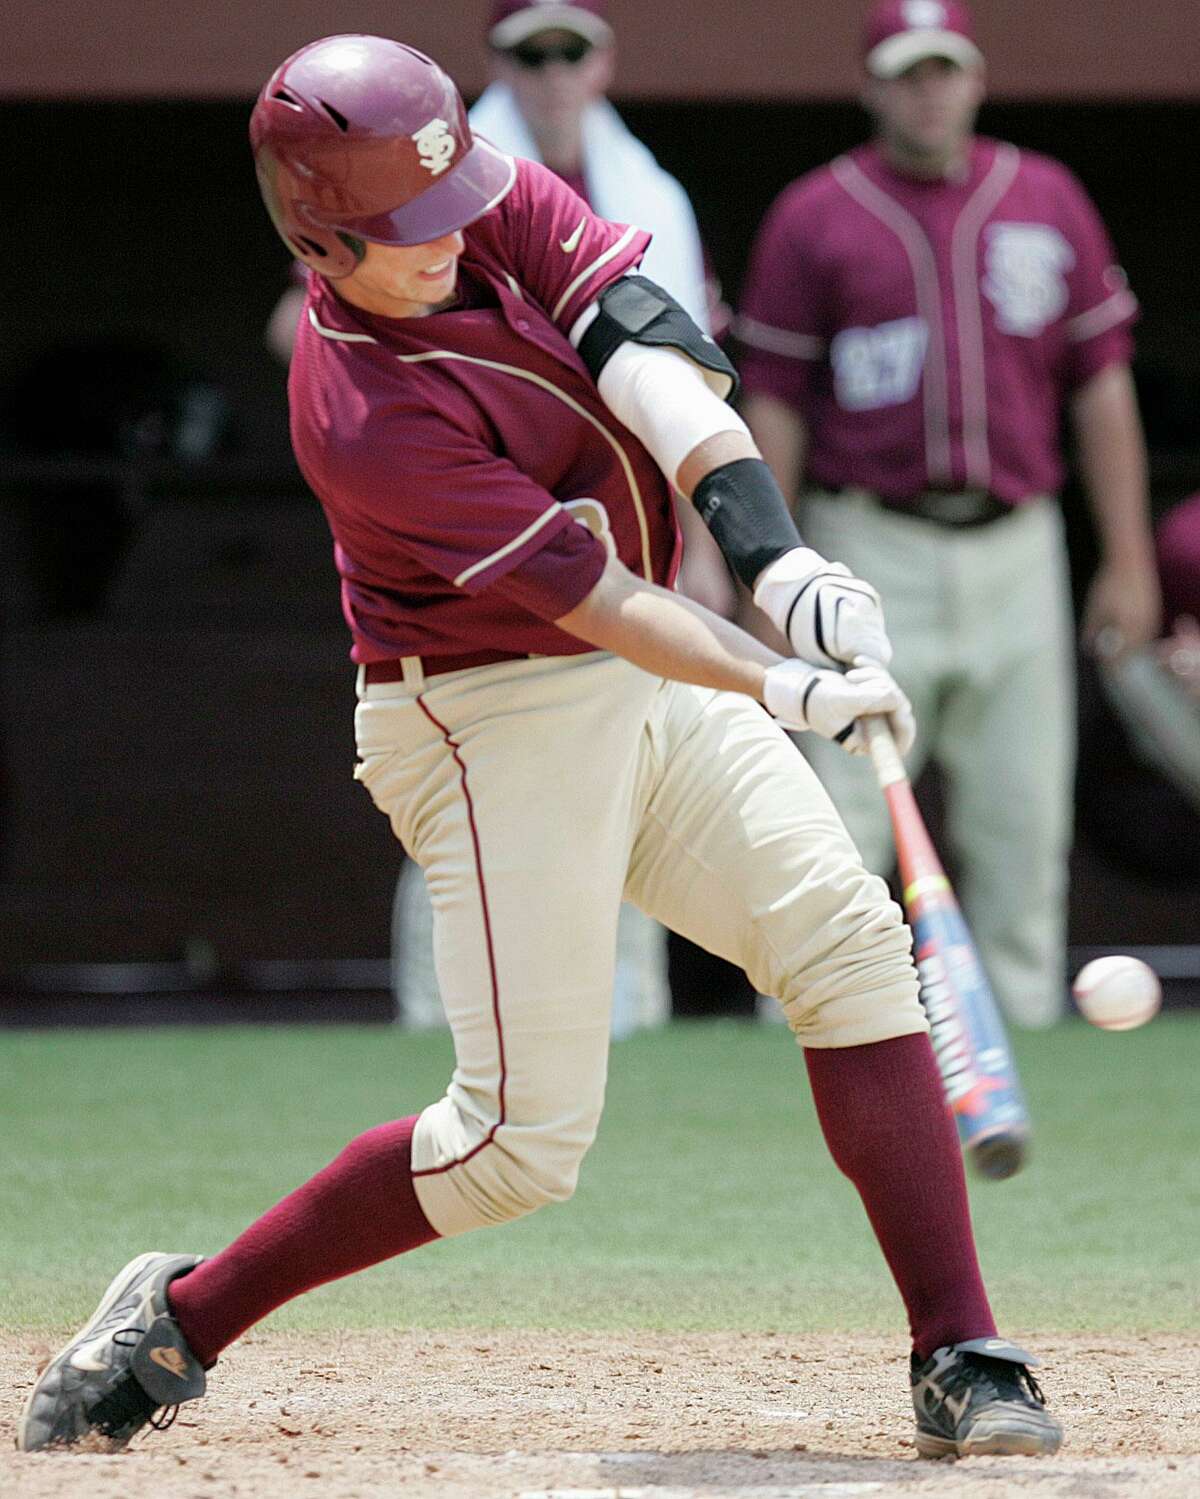 Florida State's Buster Posey hits a two run home run against Wichita St in the seventh inning of the NCAA Tallahassee Super Regional baseball game which Florida St won 11-4 on Sunday, June 8, 2008 in Tallahassee, Fla. (AP Photo/Steve Cannon)